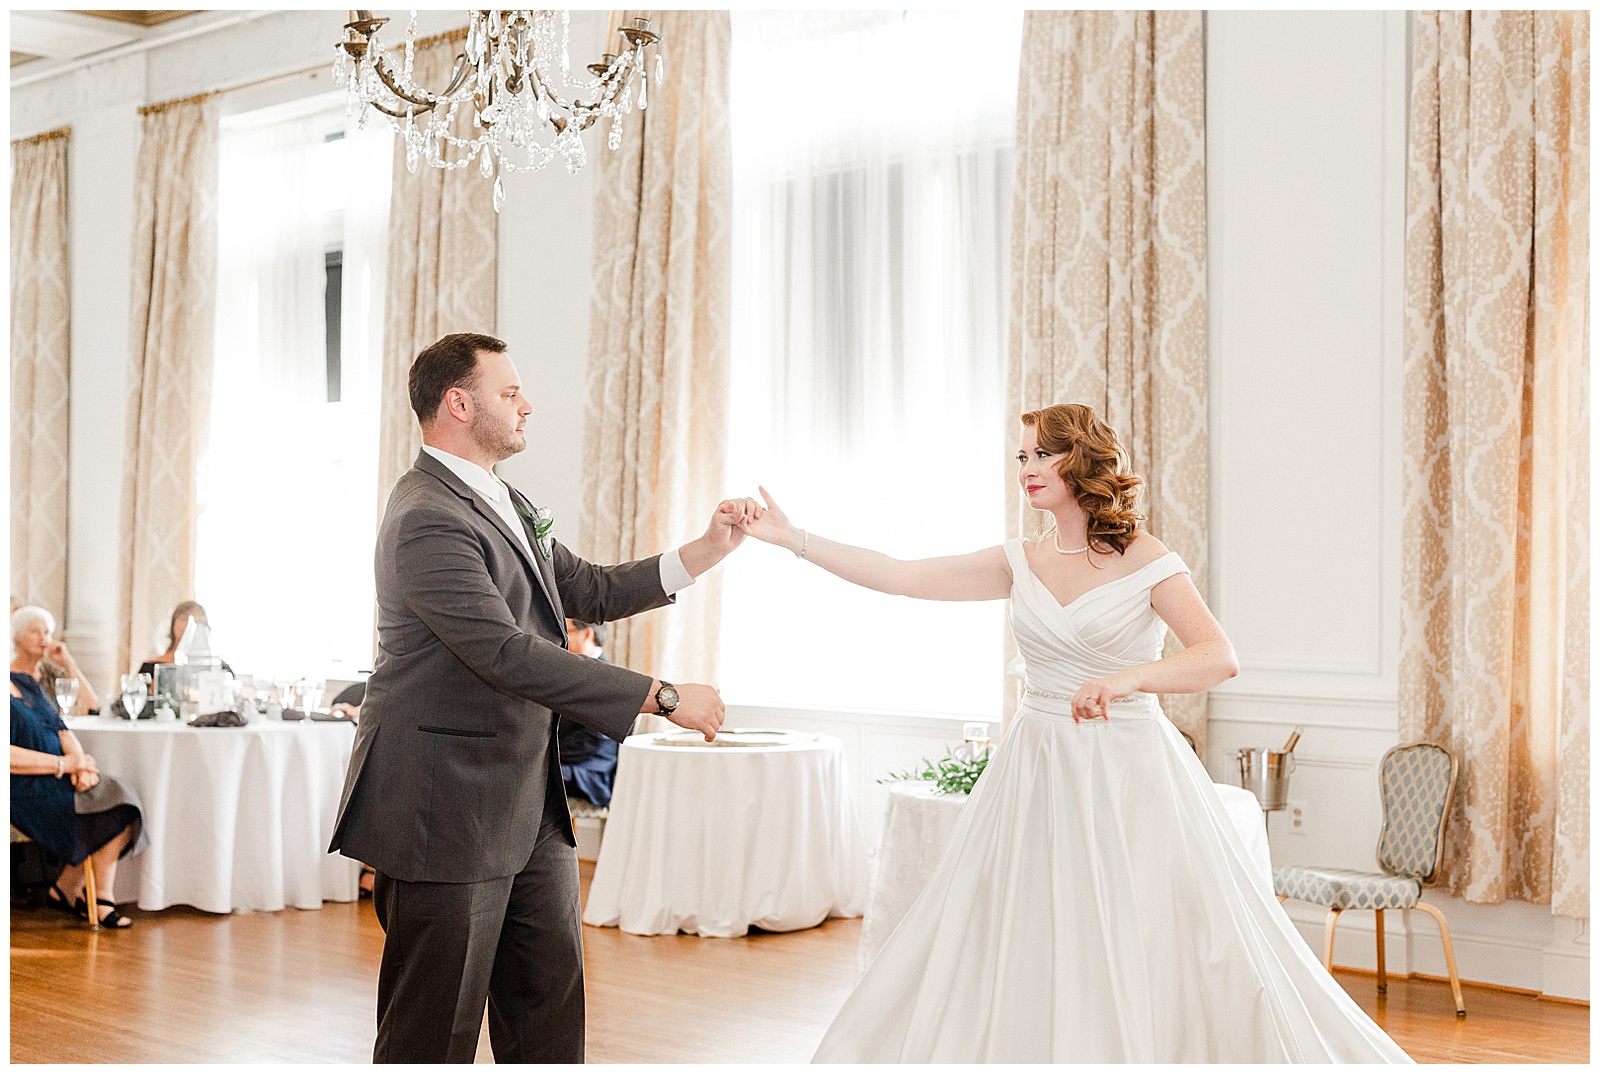 Gorgeous Red-Haired Bride and Groom’s First Dance at elegant indoor floral venue in 1940s Modern Vintage Wedding in Charlotte, NC | check out the full wedding at KevynDixonPhoto.com